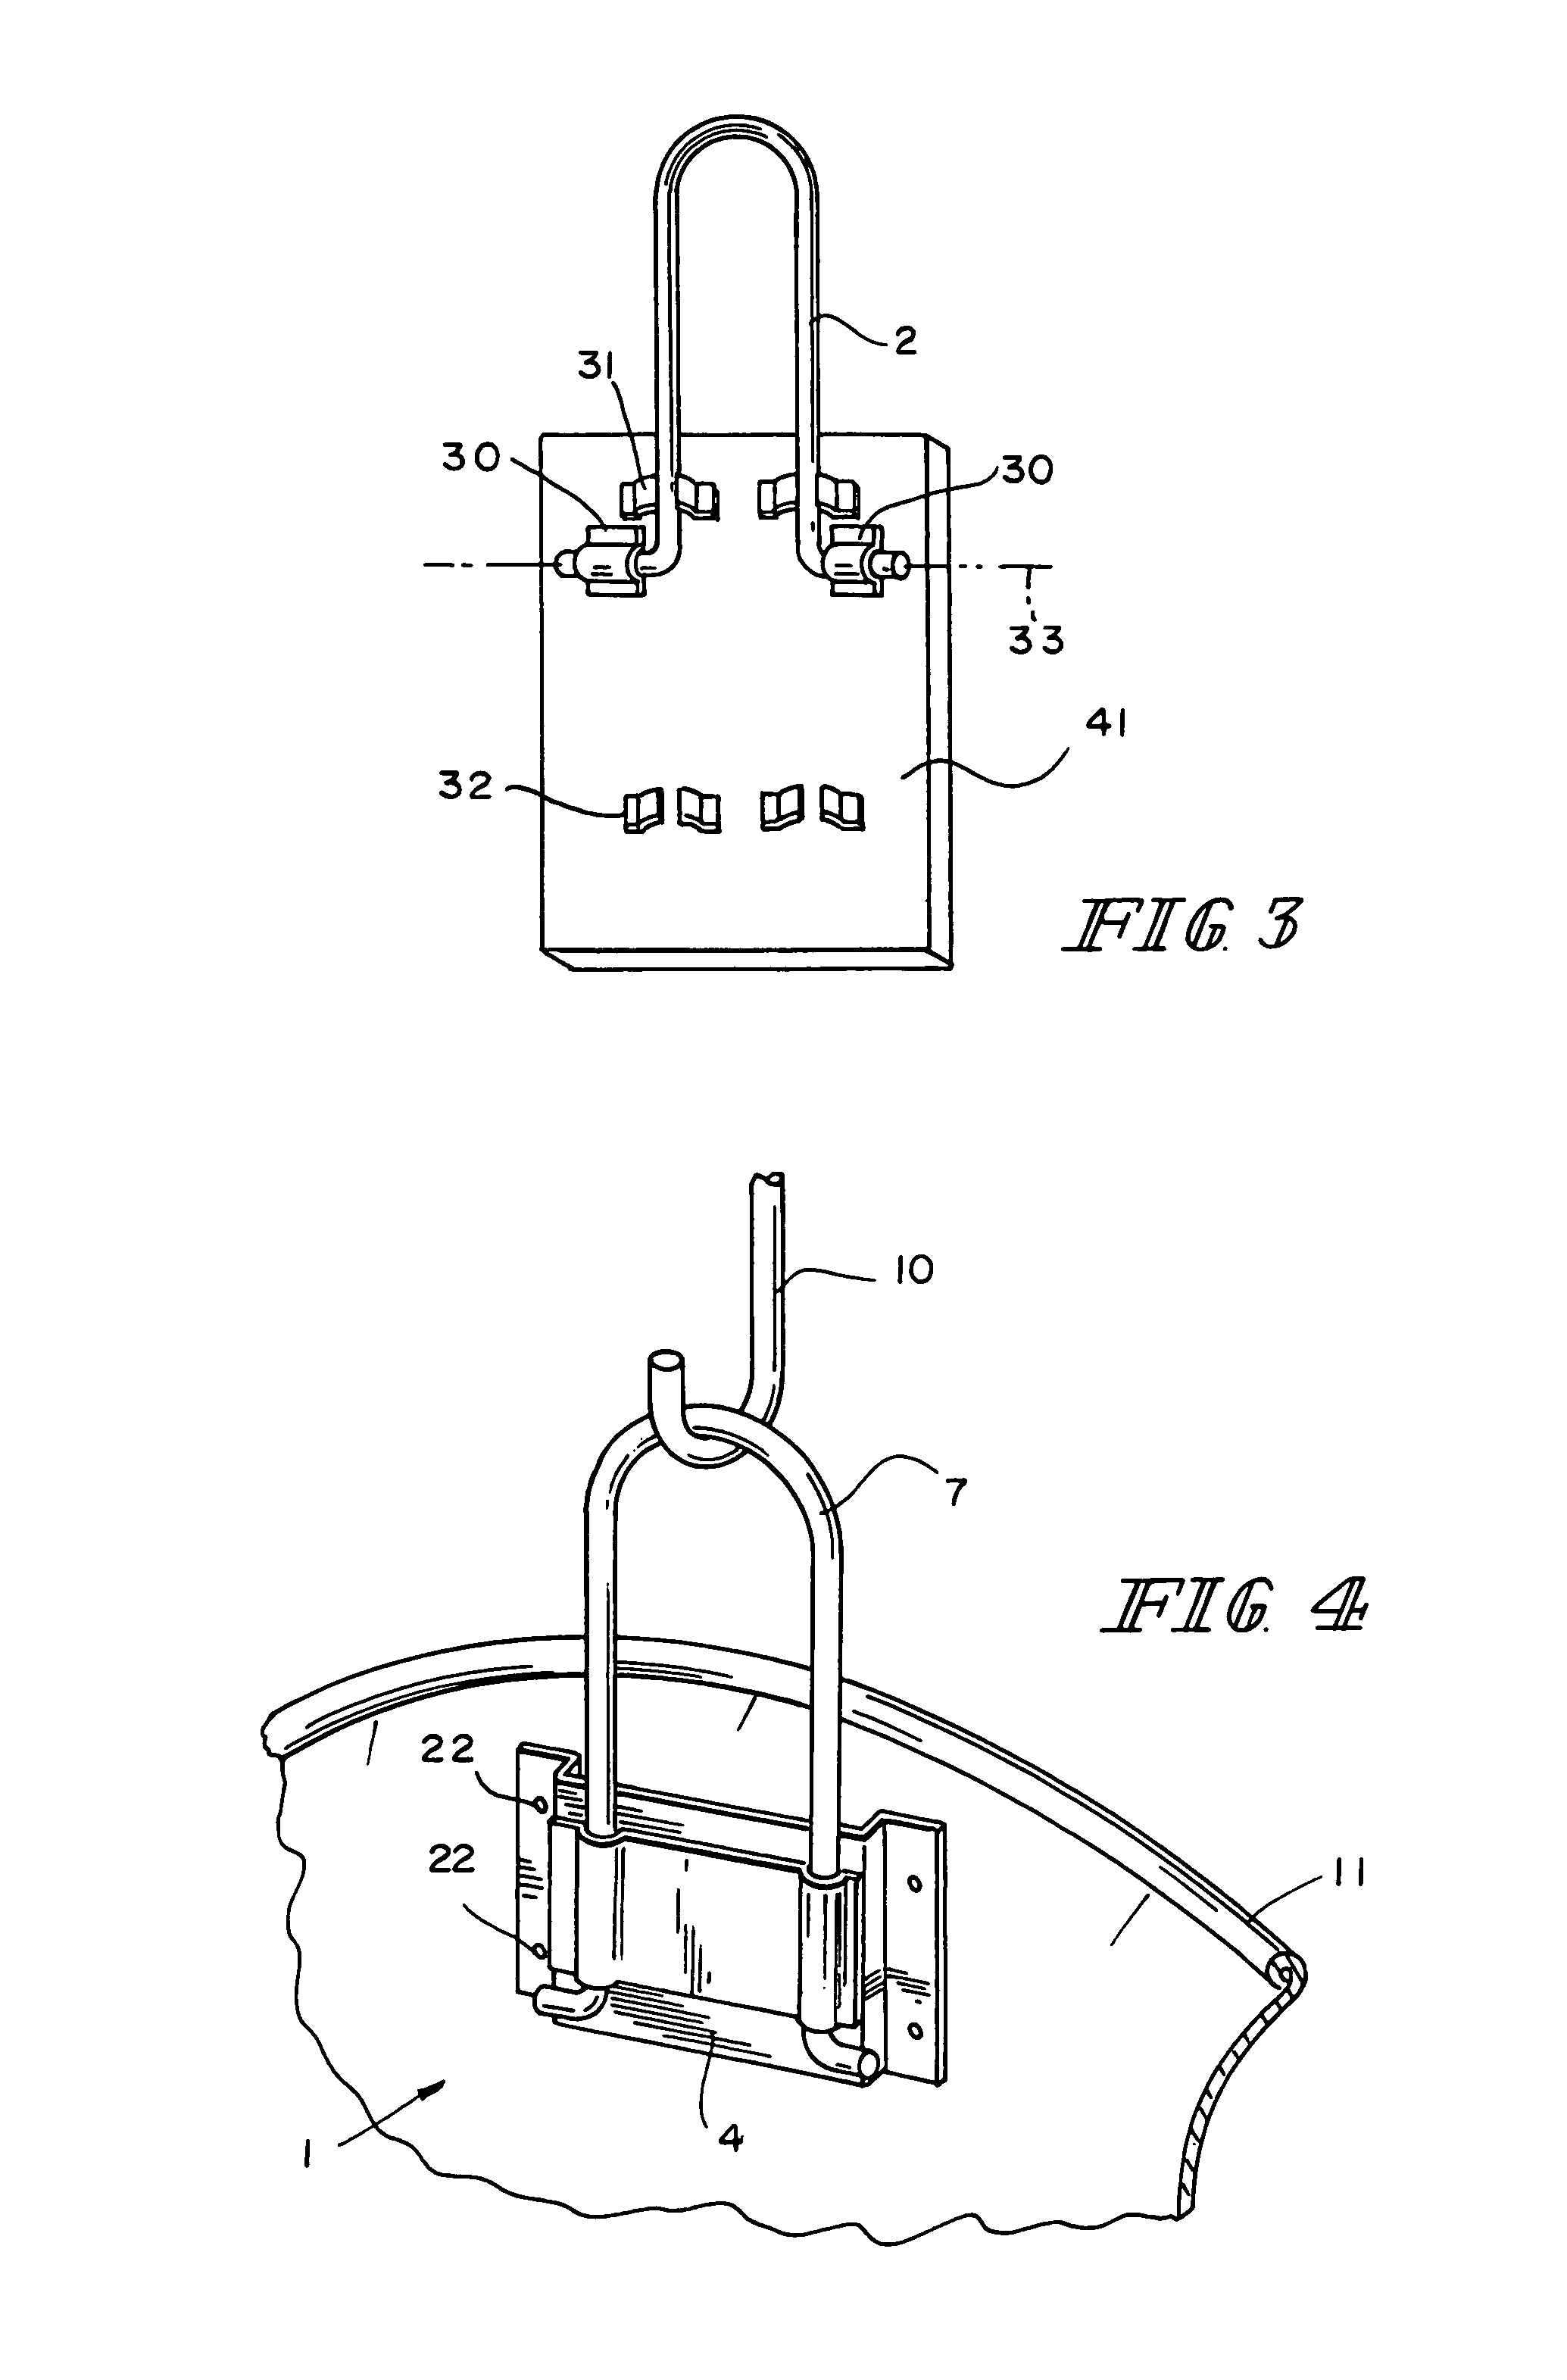 Device for implement storage